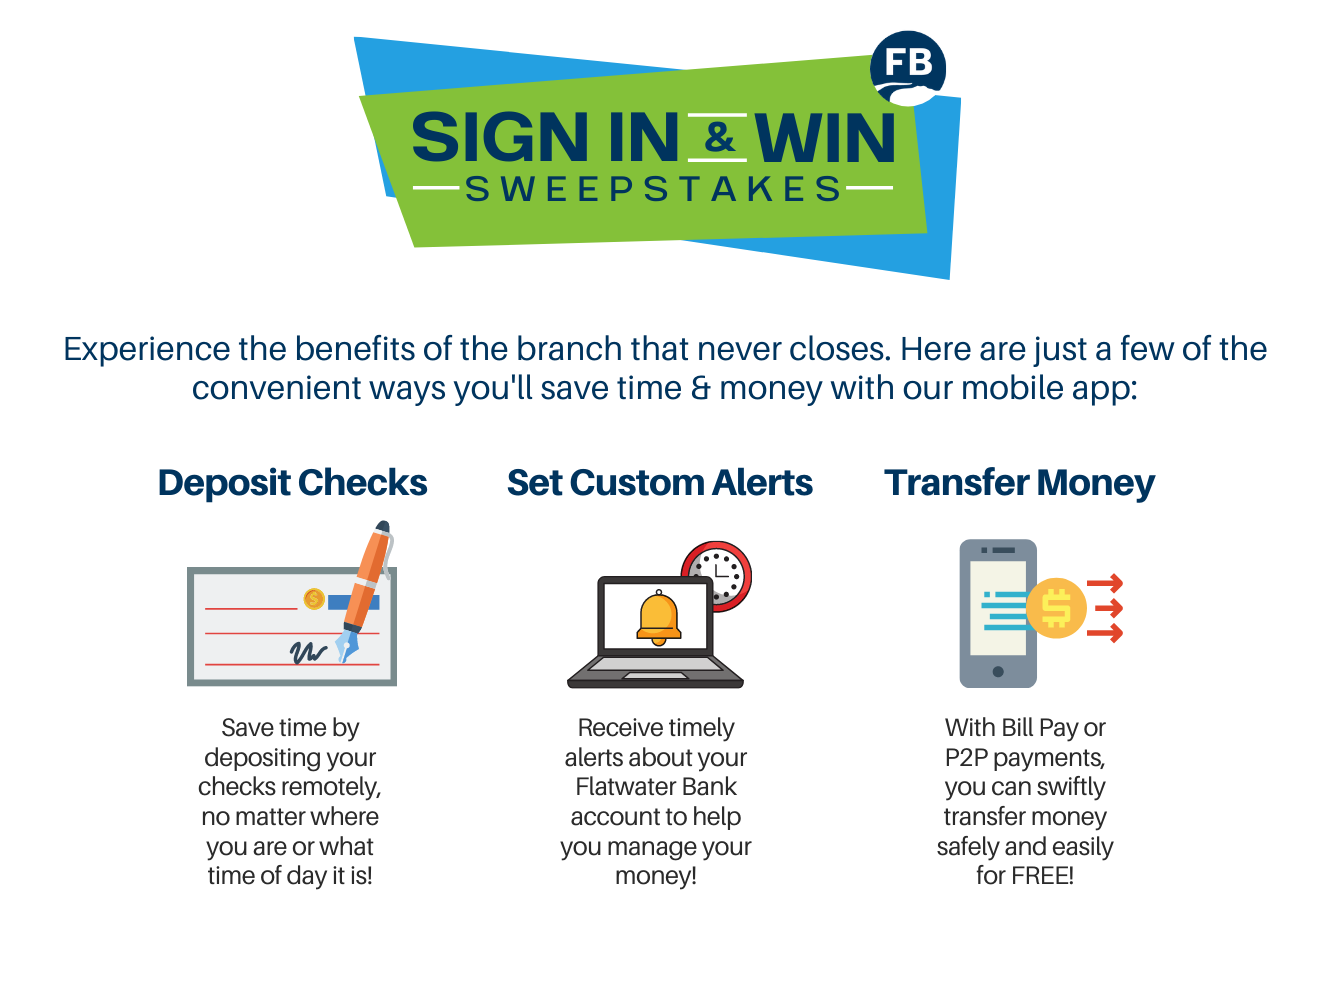 Image showing ways to save time and money with our mobile app. Deposit checks, set custom alerts, and transfer money.